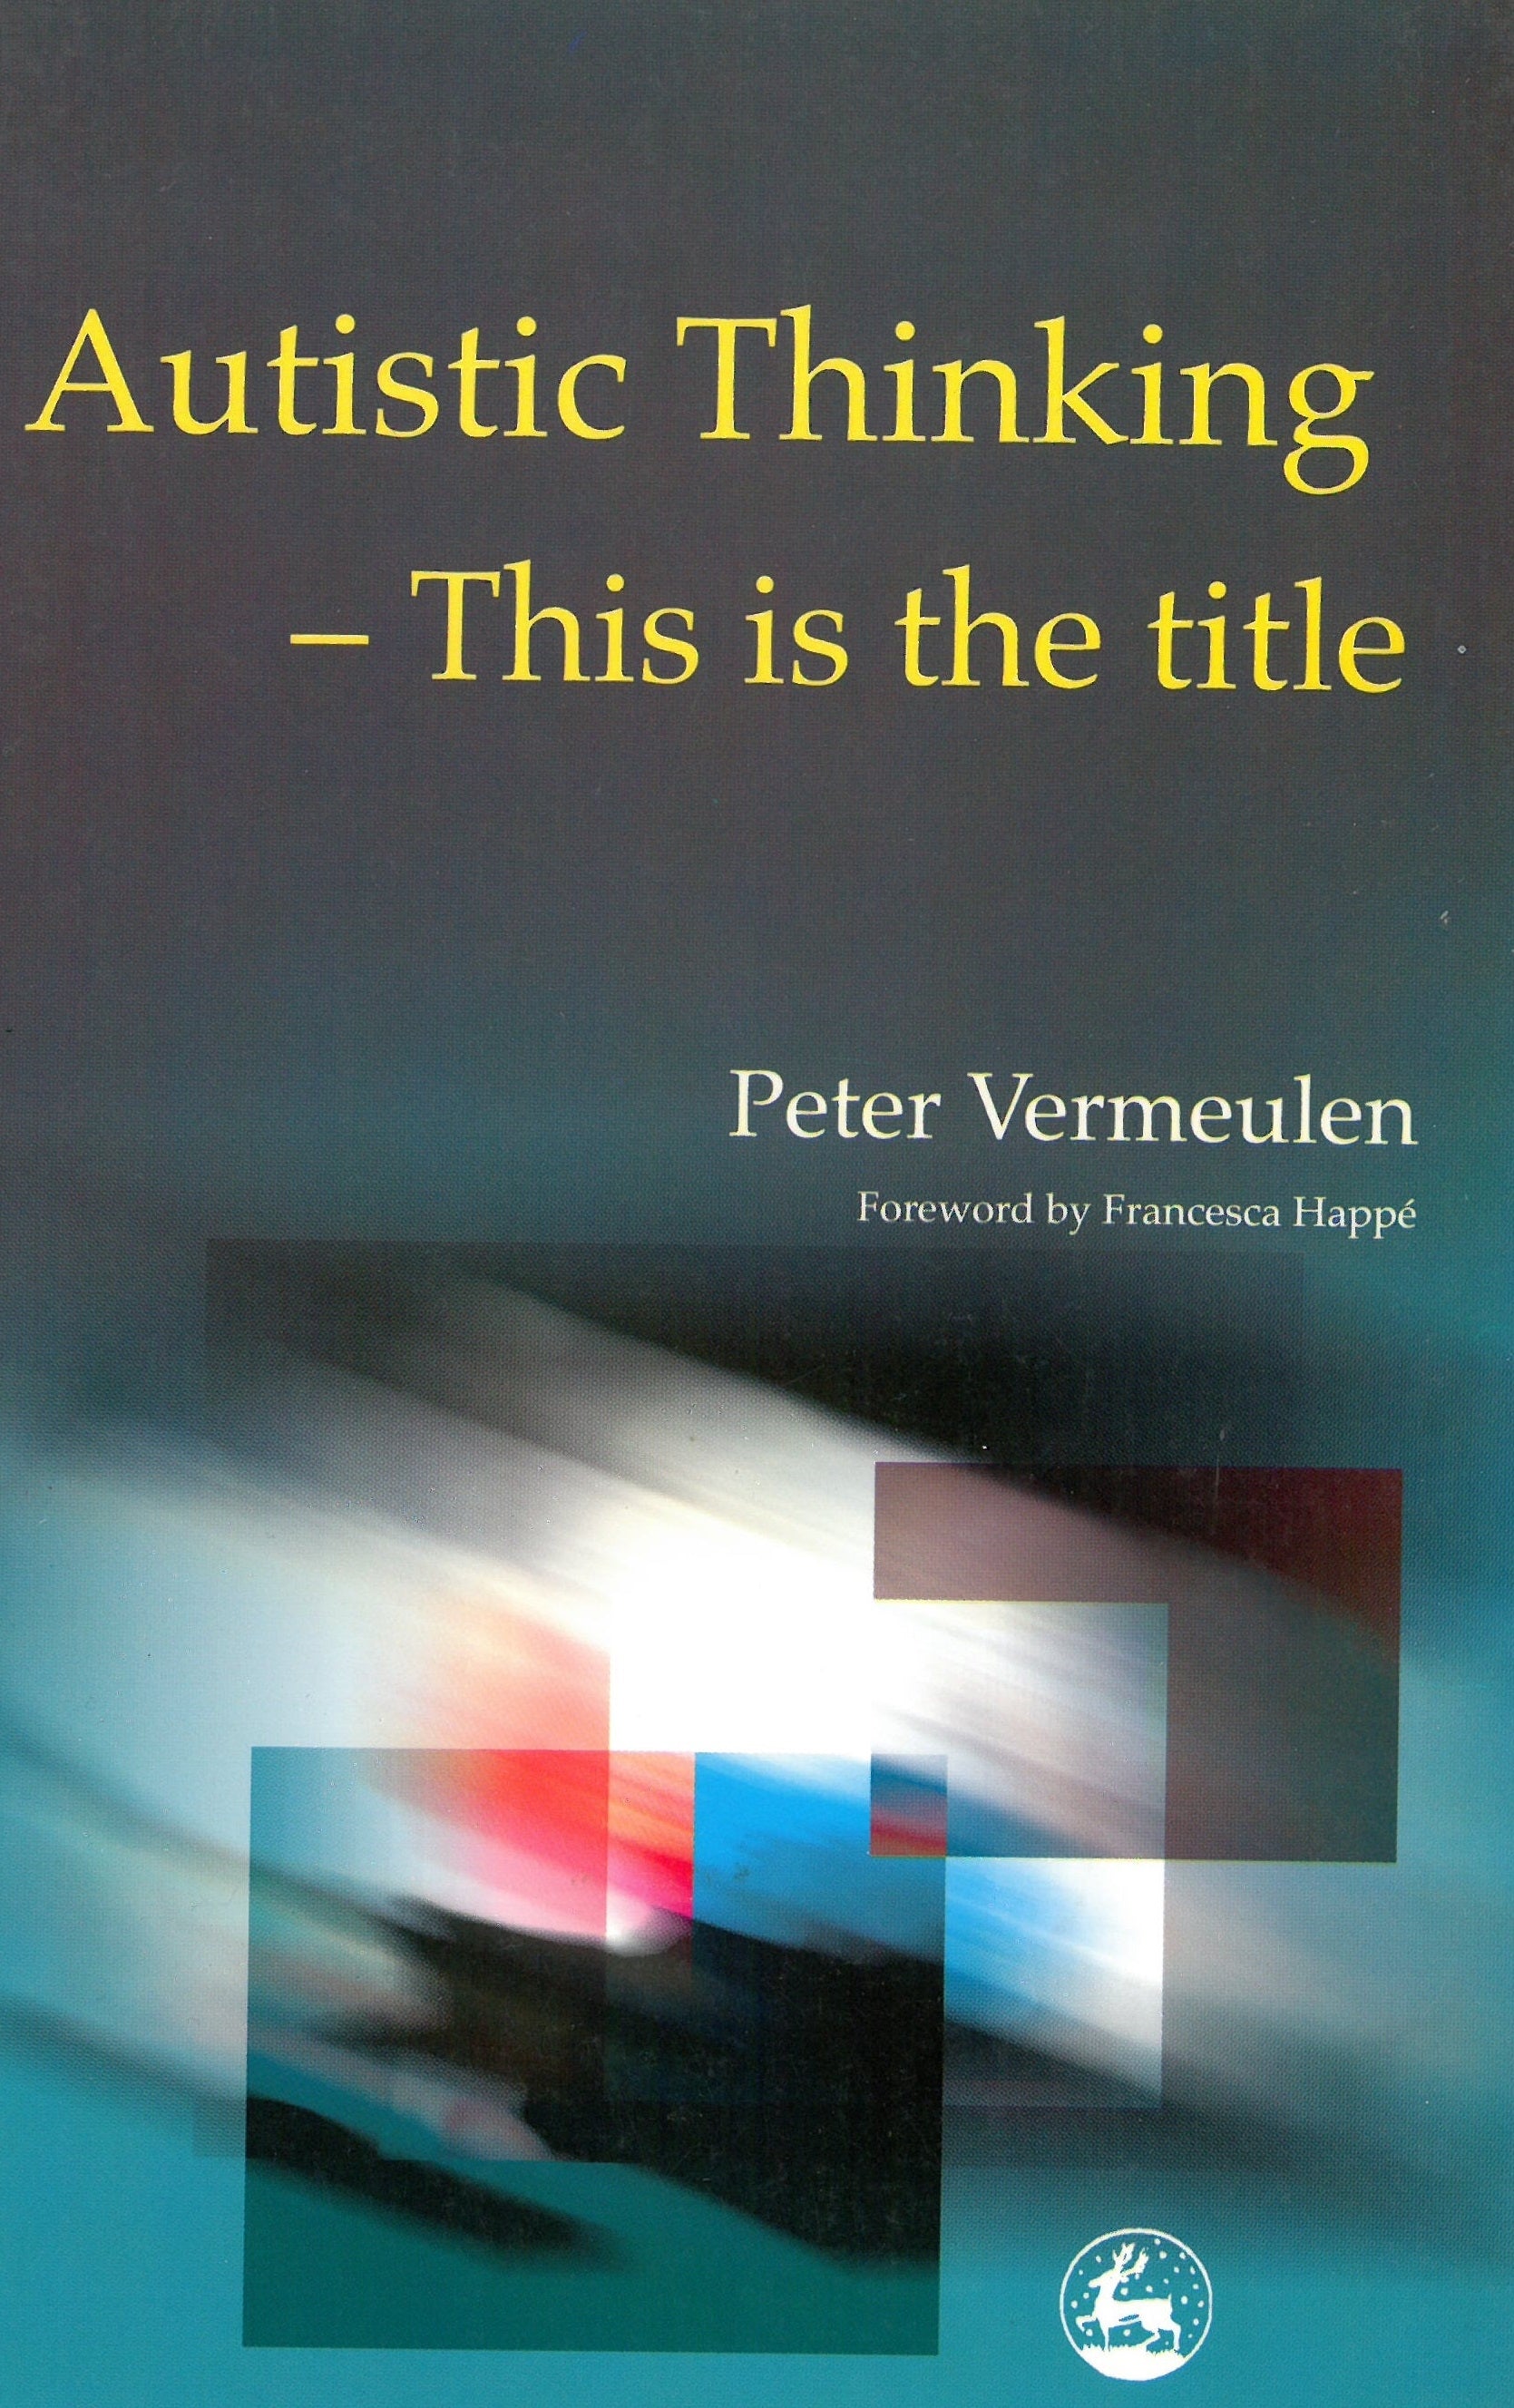 Autistic Thinking by Peter Vermeulen